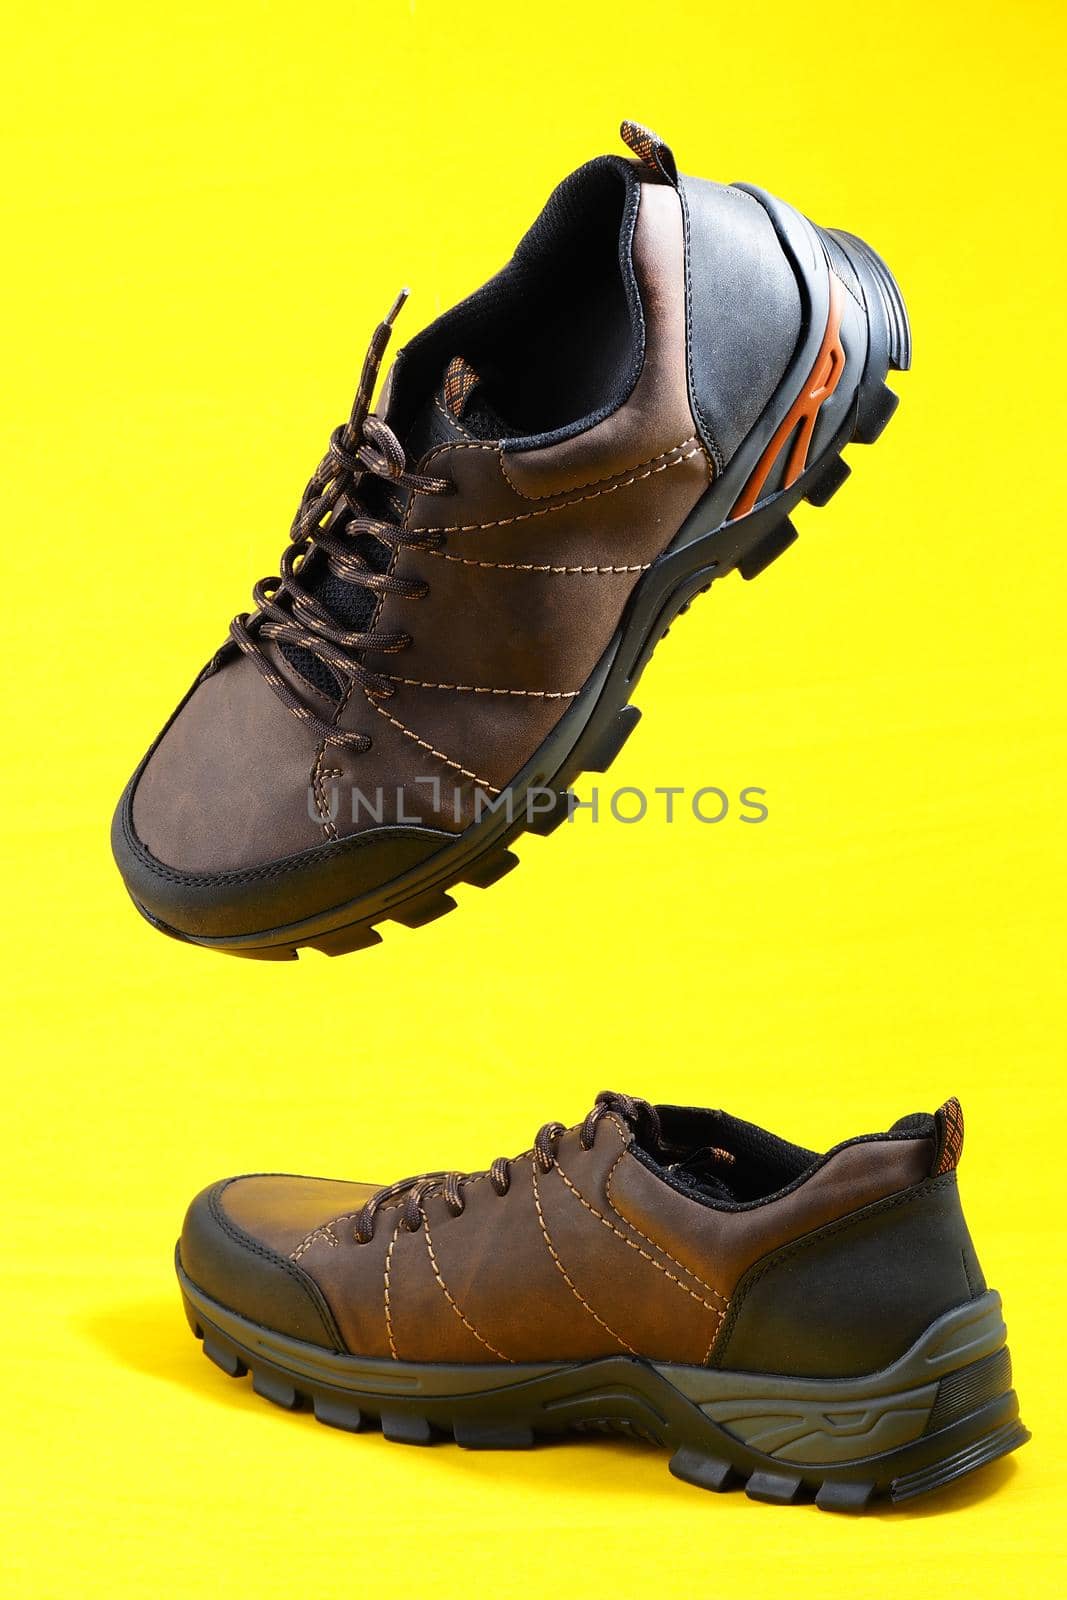 Men's shoes. Stylish sneakers on a yellow background. Isolated, close-up, levitation. High quality photo